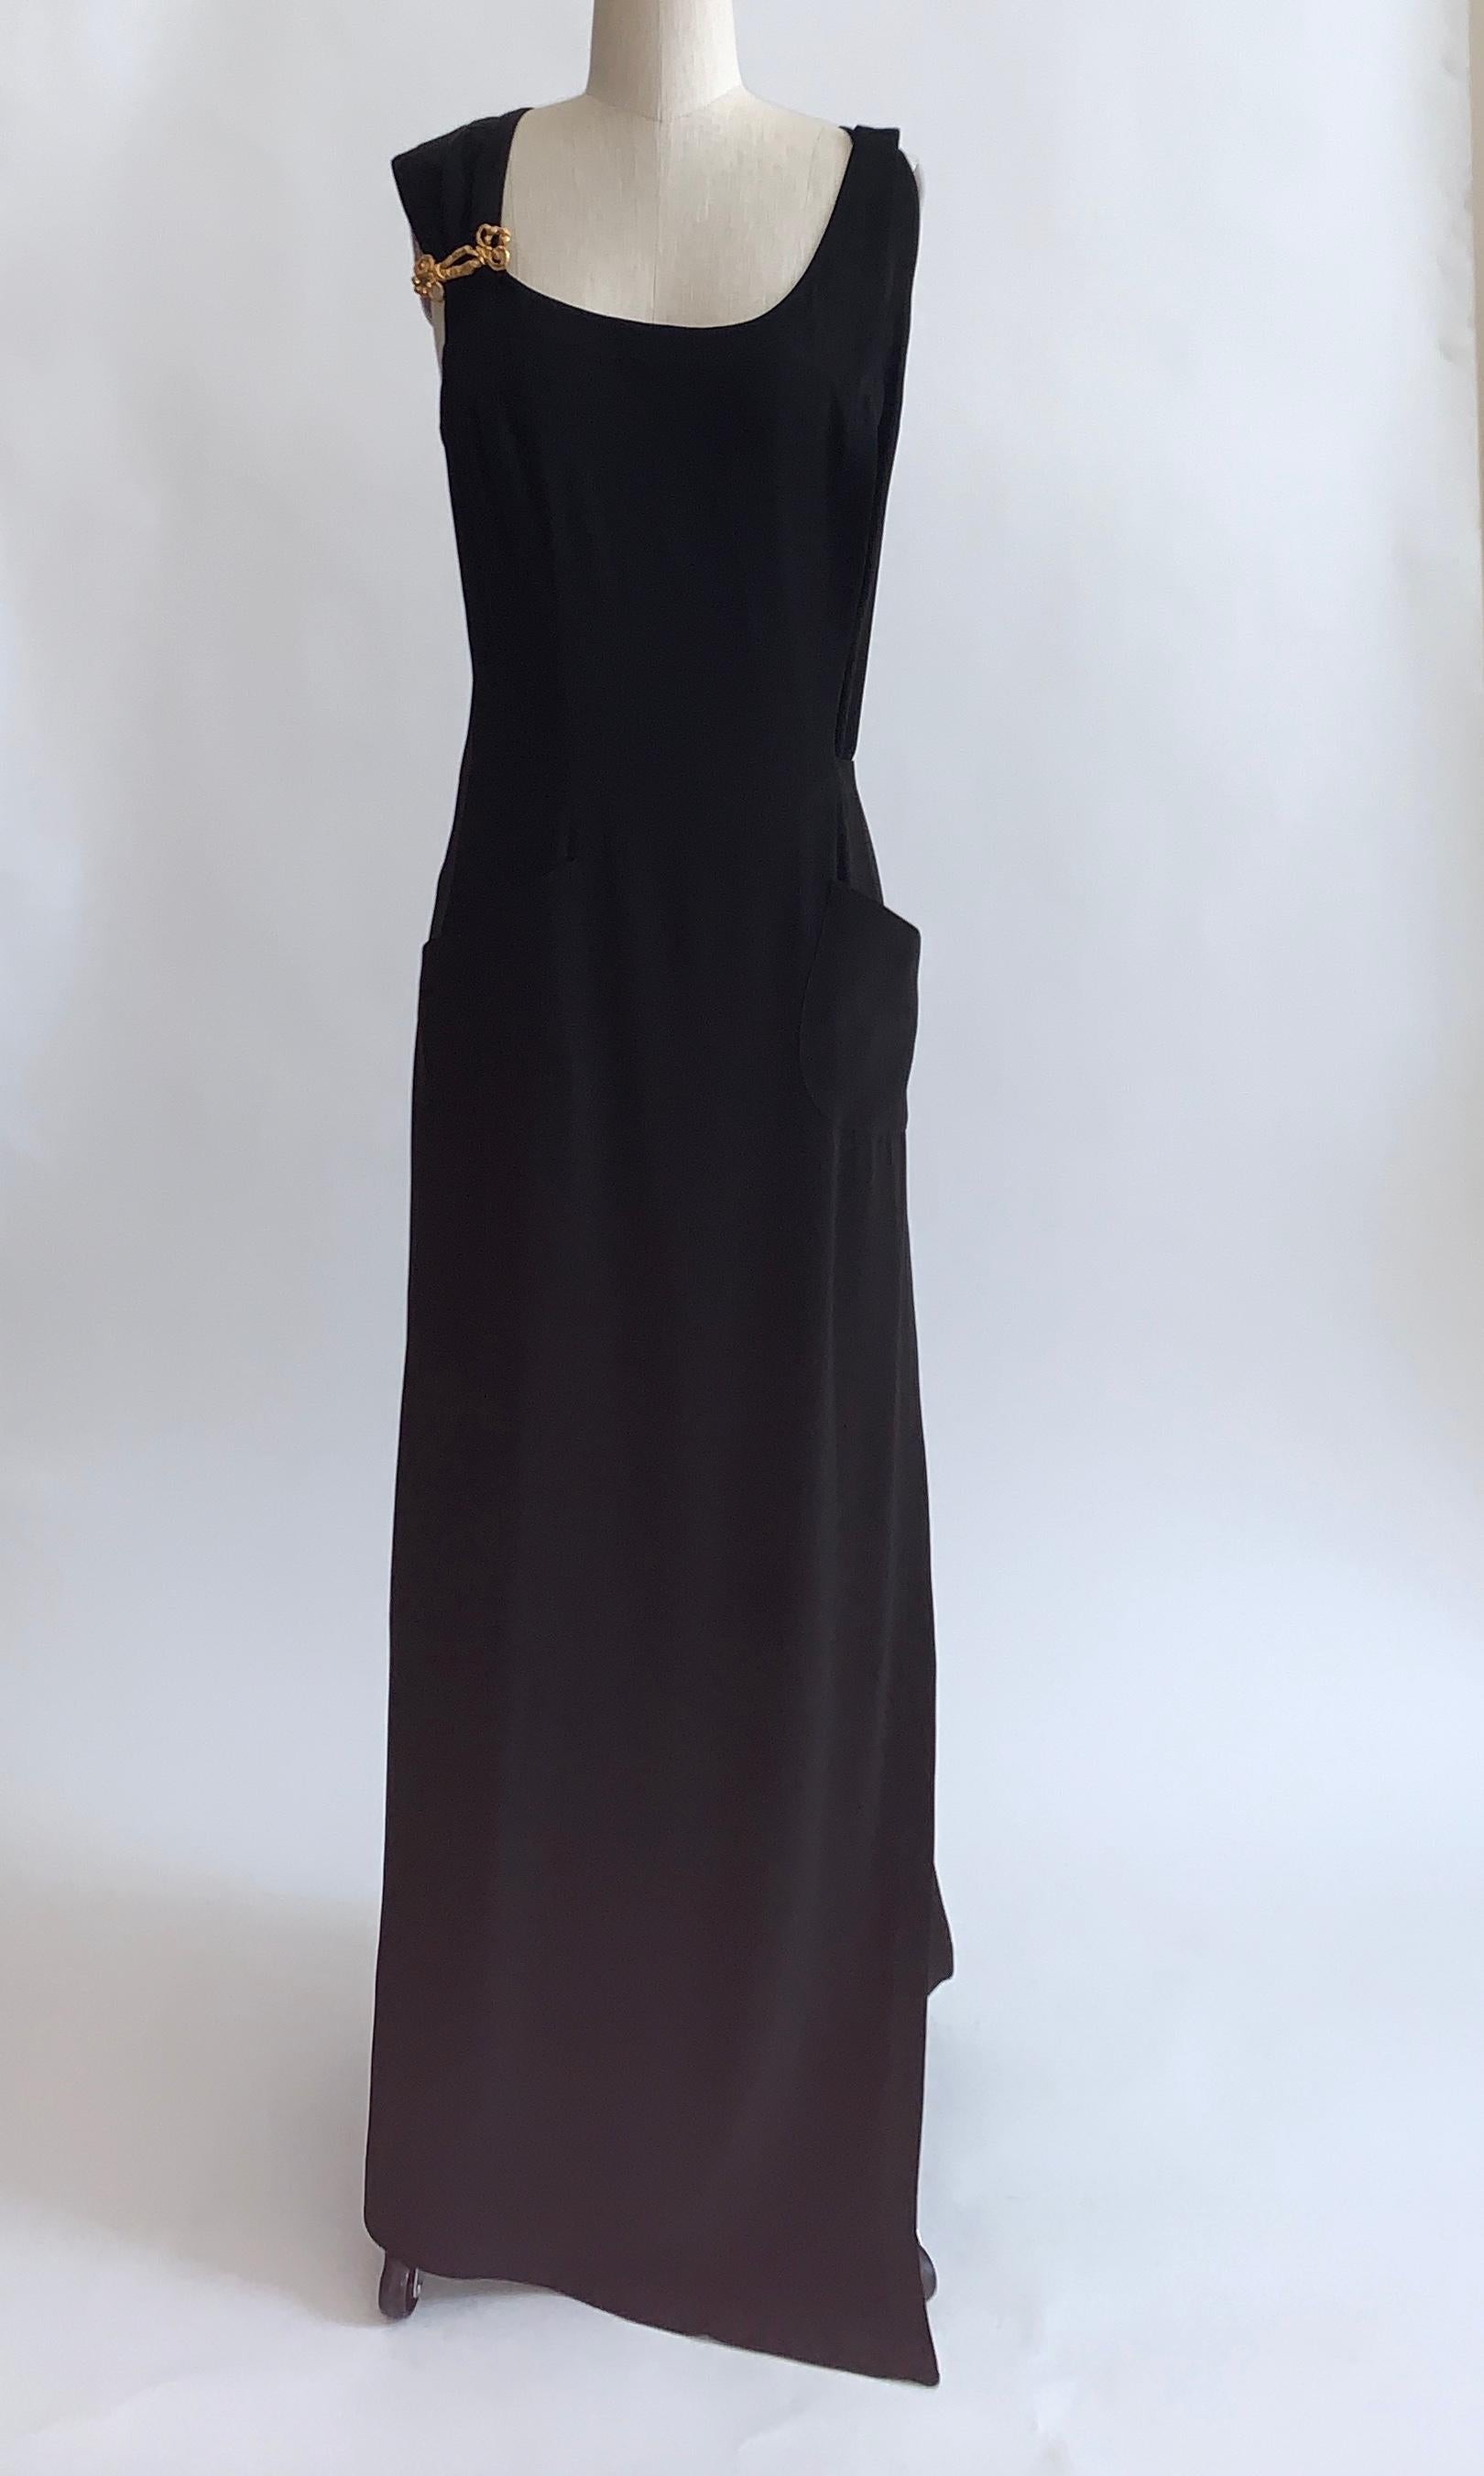 Christian Lacroix vintage black full length wrap dress with gold embellishment at one strap. Fastens closed at other strap and wraps with belt and snap at waist.  Patch pockets at front sides. 

Content unknown. 

Made in France.

Size not labeled,